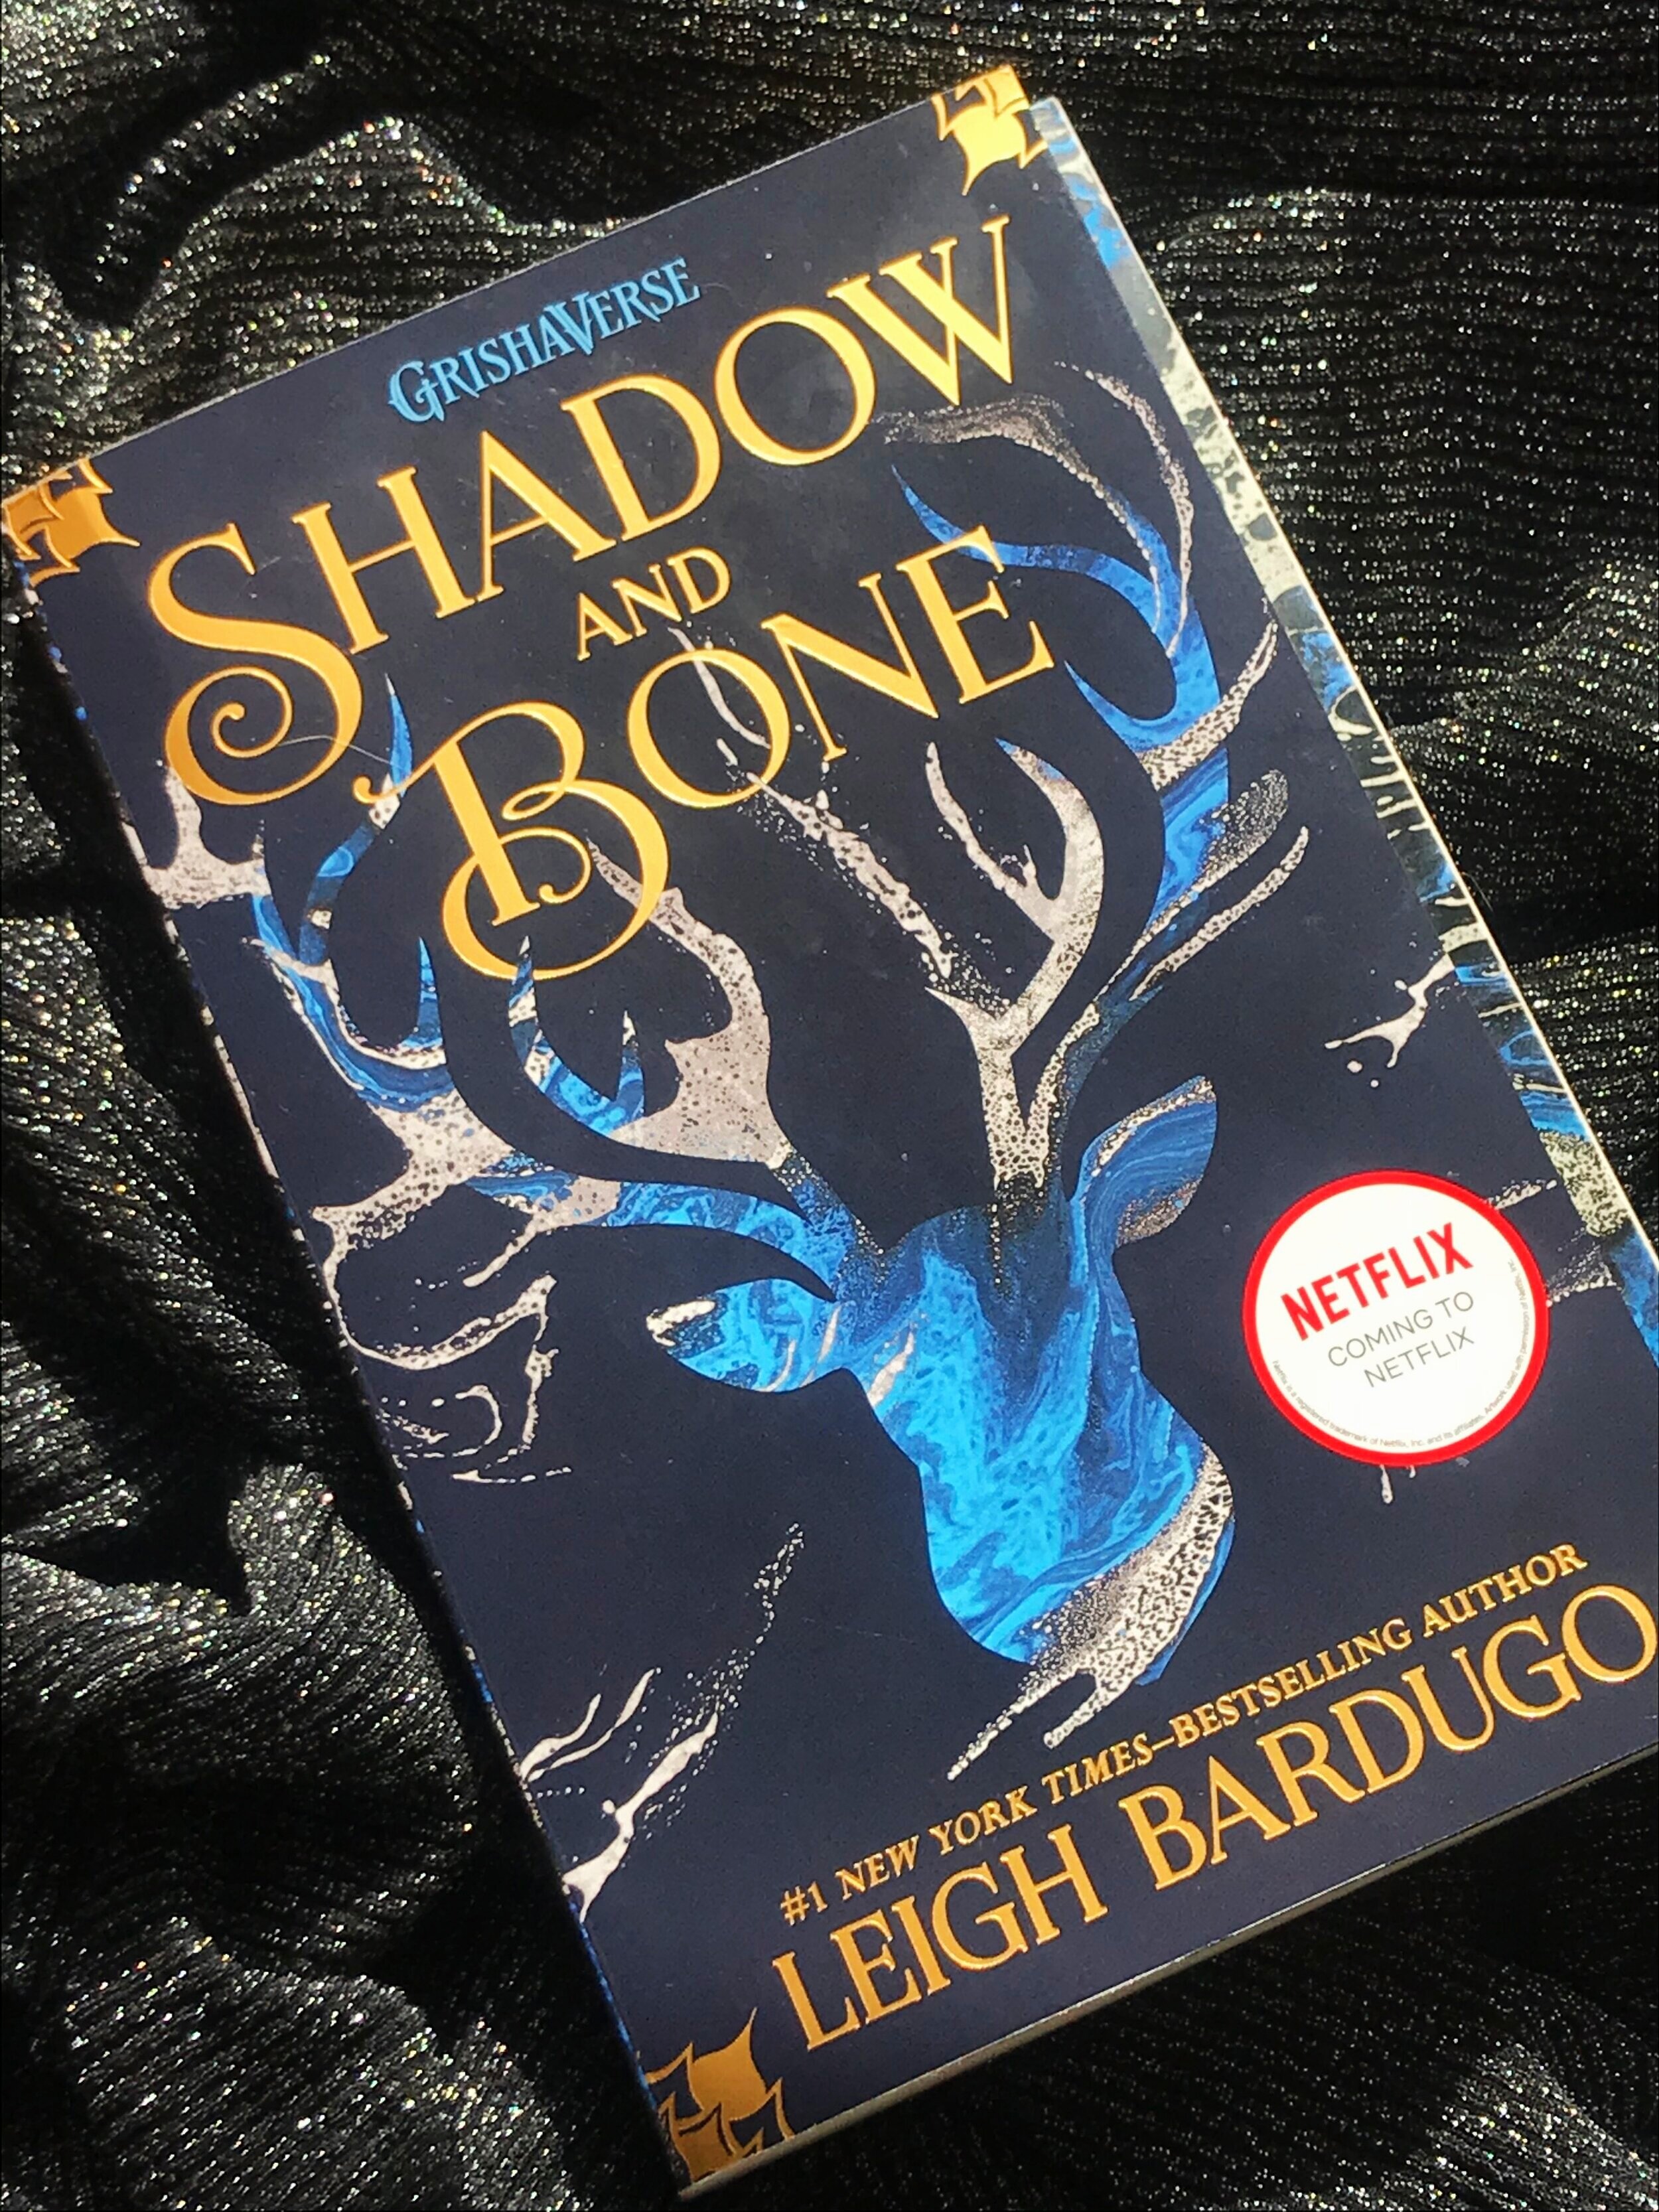 The Shadow and Bone Grishaverse, Explained